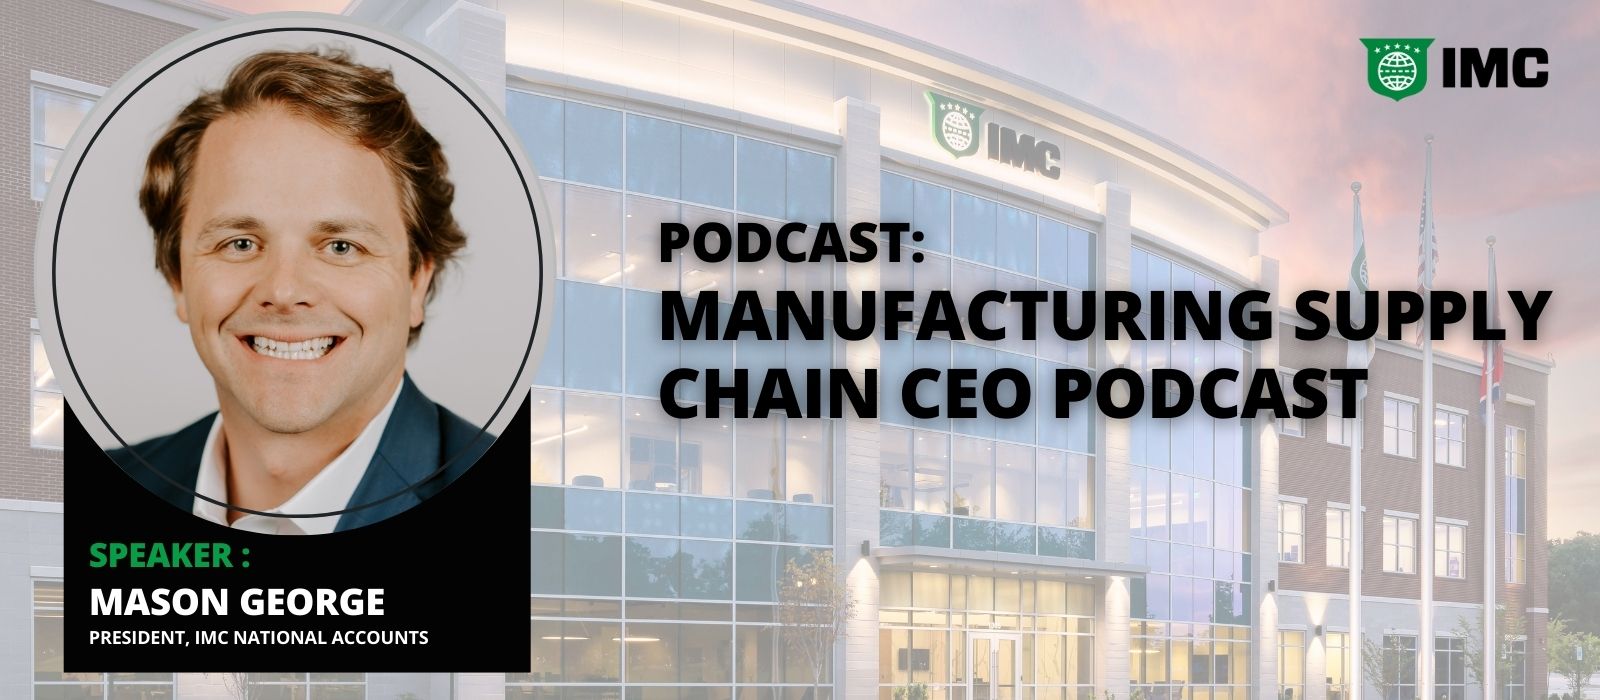 Mason George on Manufacturing Supply Chain CEO Podcast